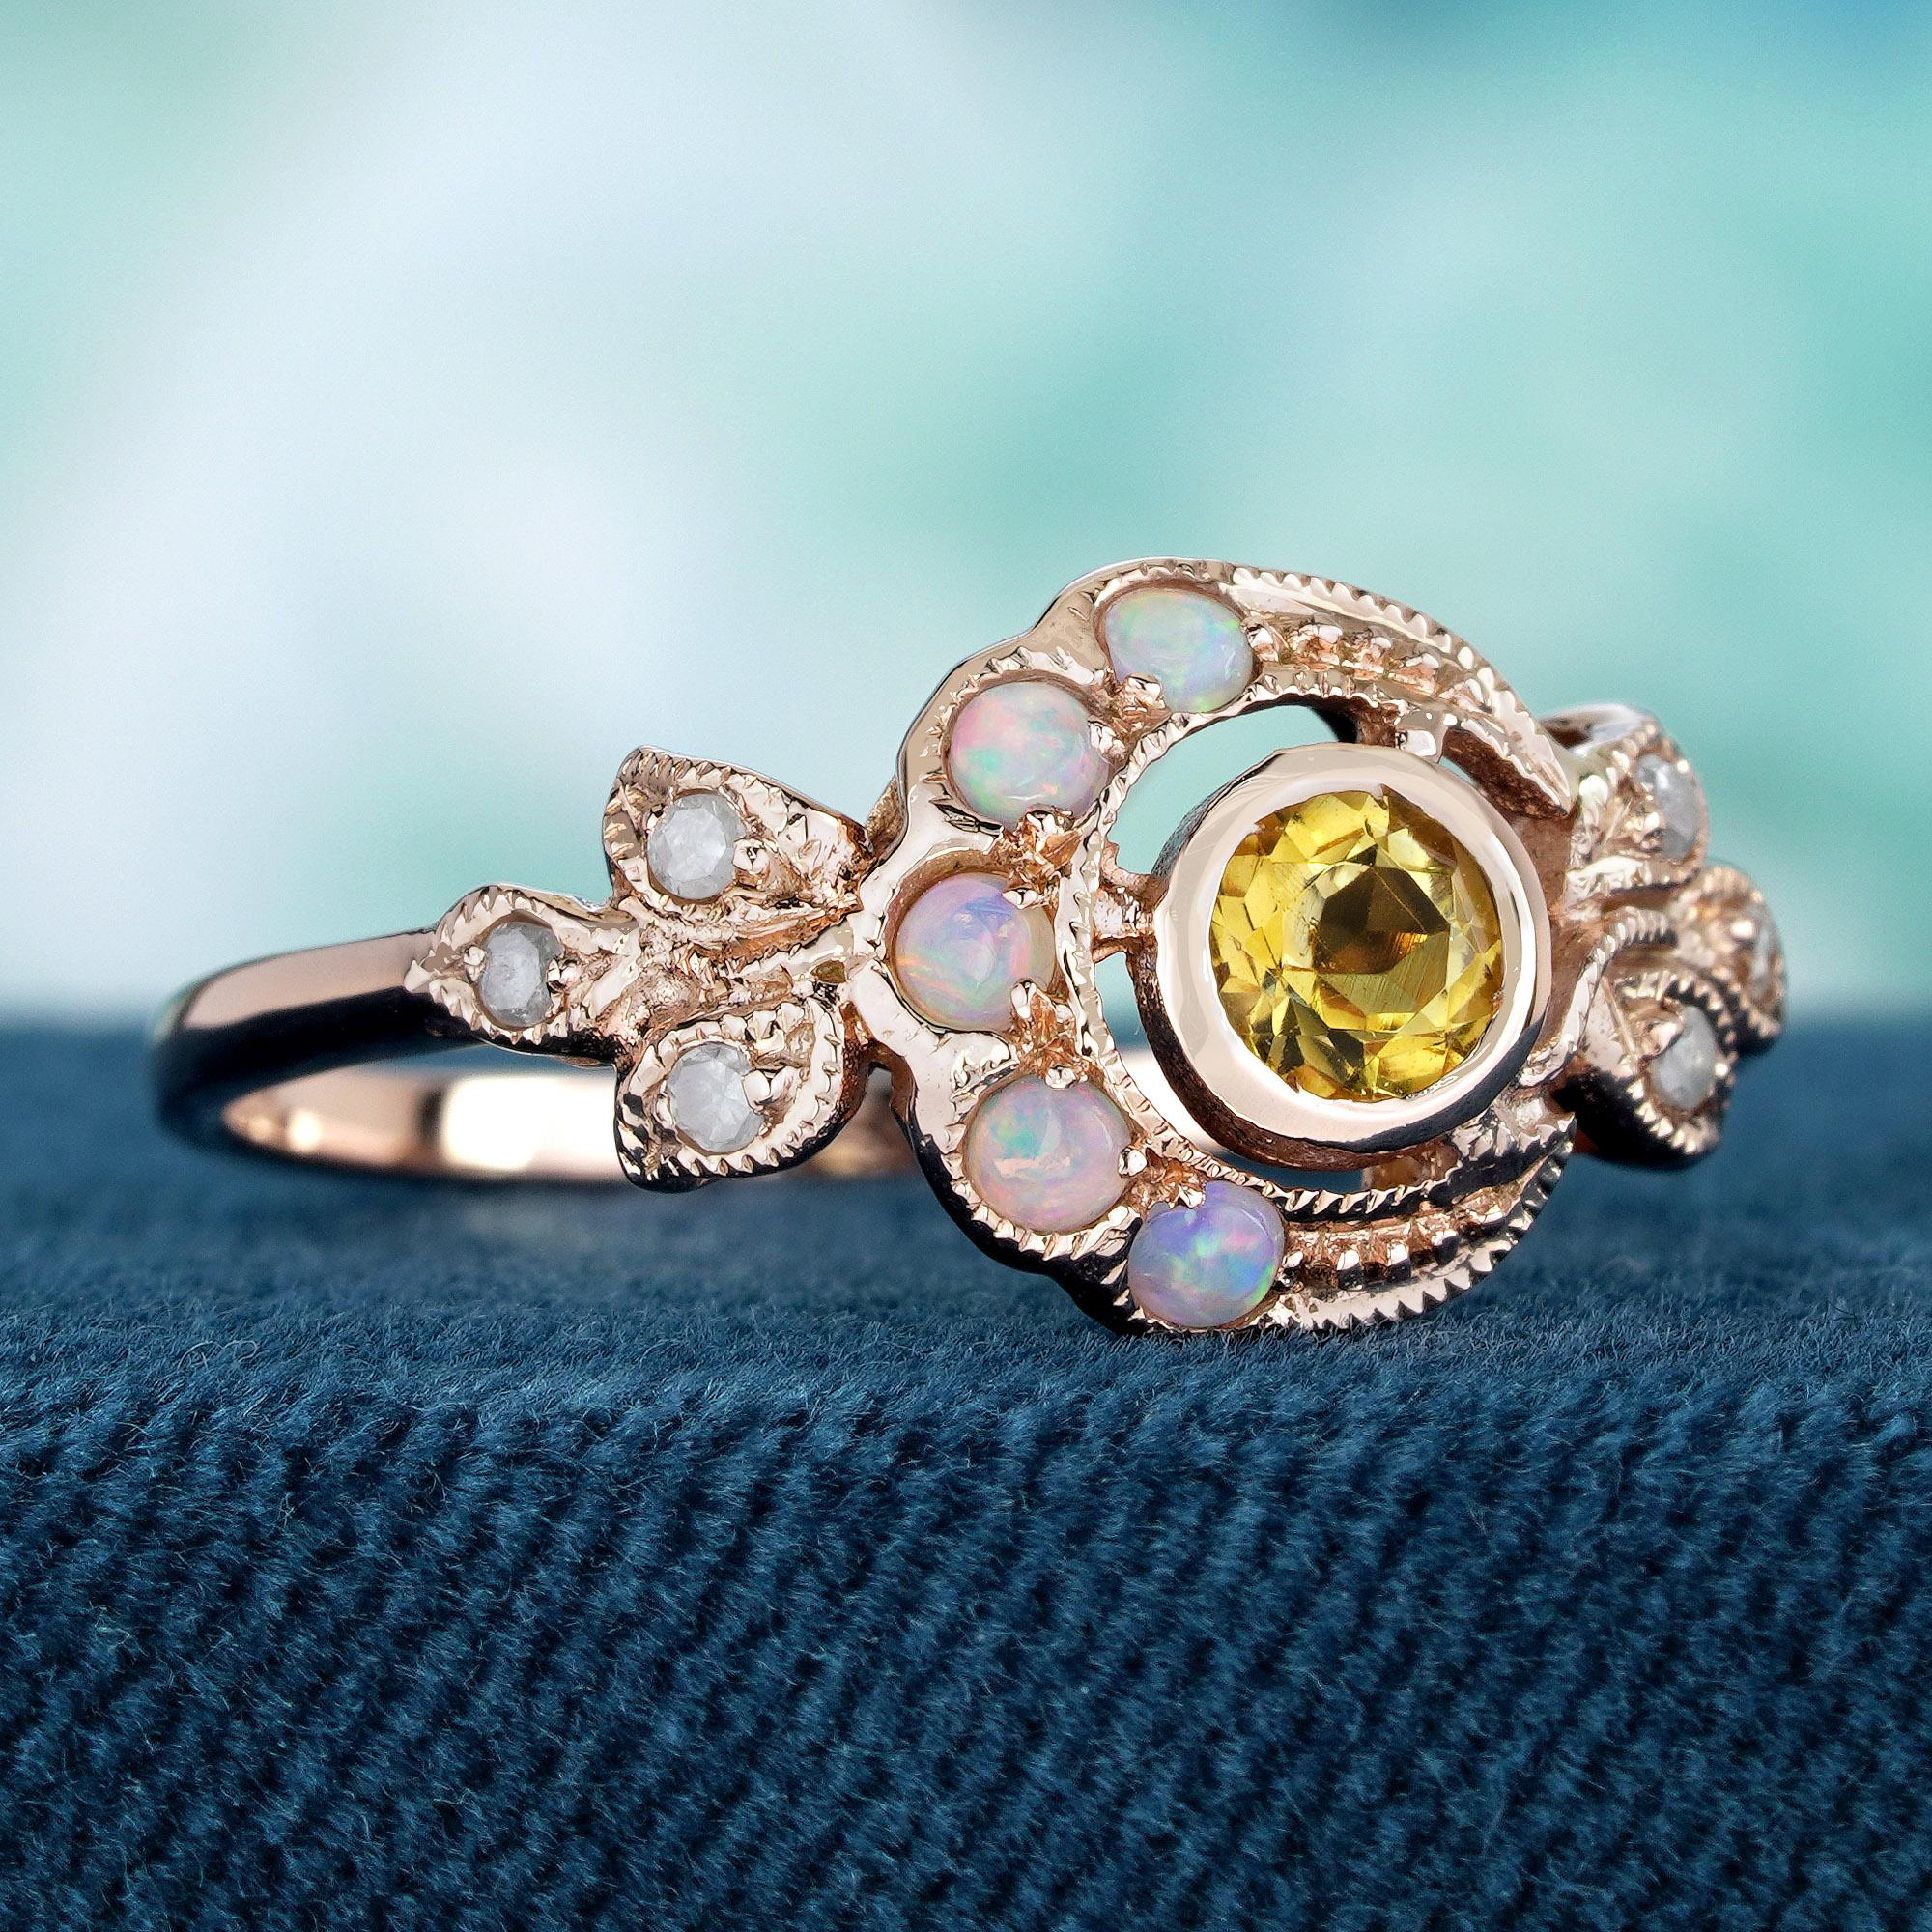 This vintage-inspired ring exudes a captivating charm reminiscent of celestial beauty crafted in rose gold to add warmth and elegance to the piece. The central feature is a round-cut natural citrine, emanating a radiant, sunny yellow glow.